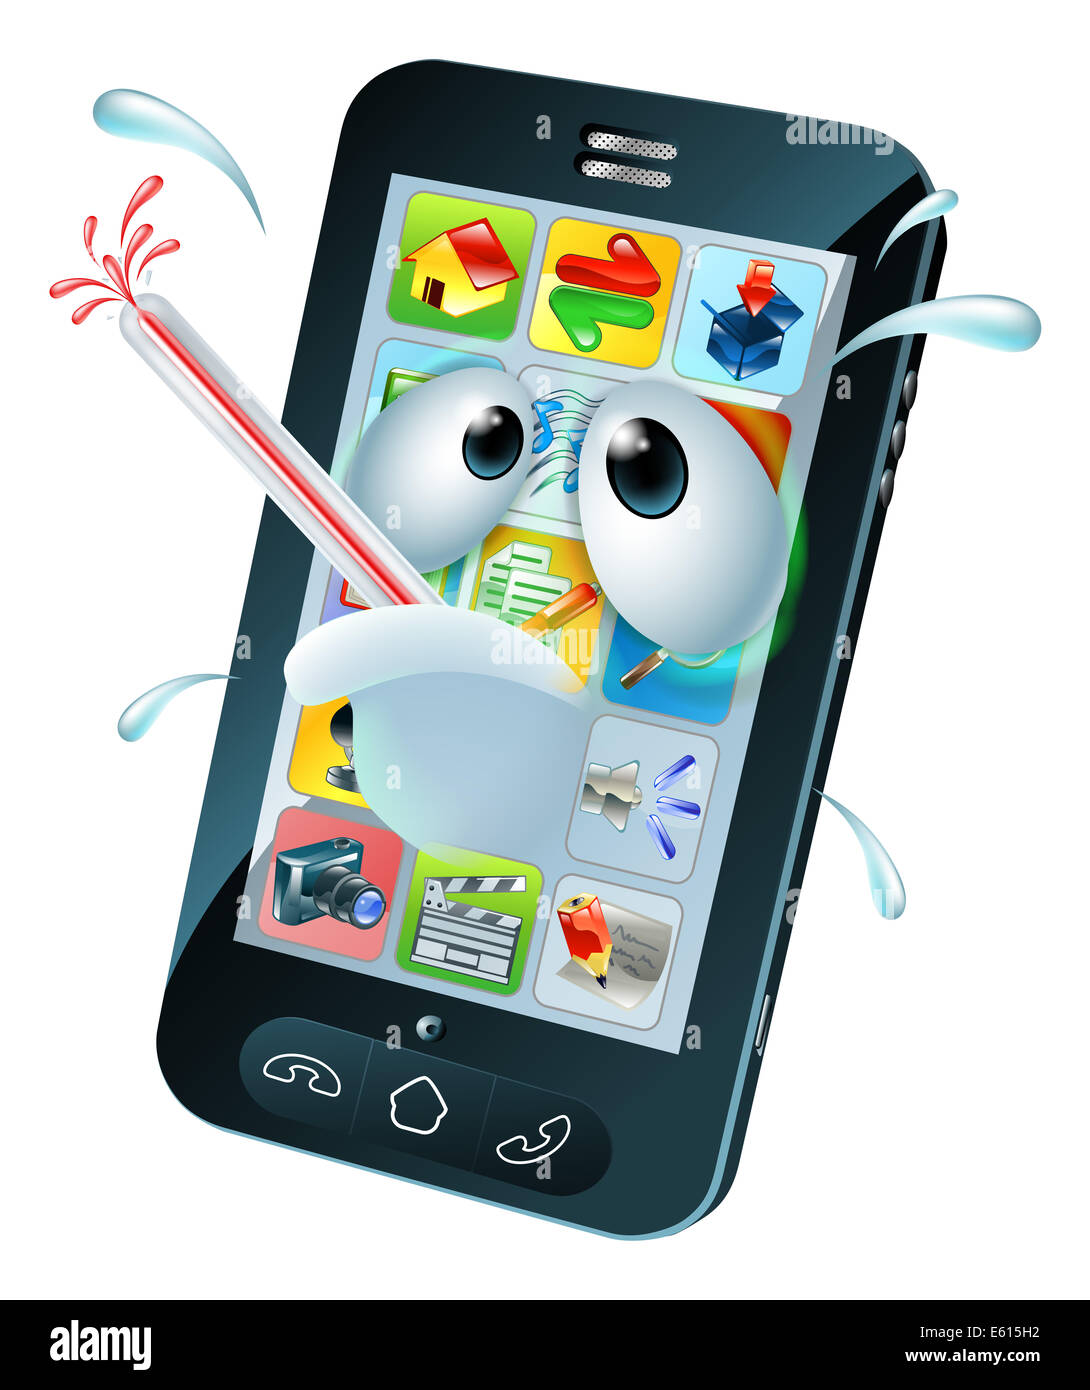 Virus cartoon mobile phone. Cartoon of an unwell sweating mobile phone with a bursting thermometer in its mouth. Could be a brok Stock Photo